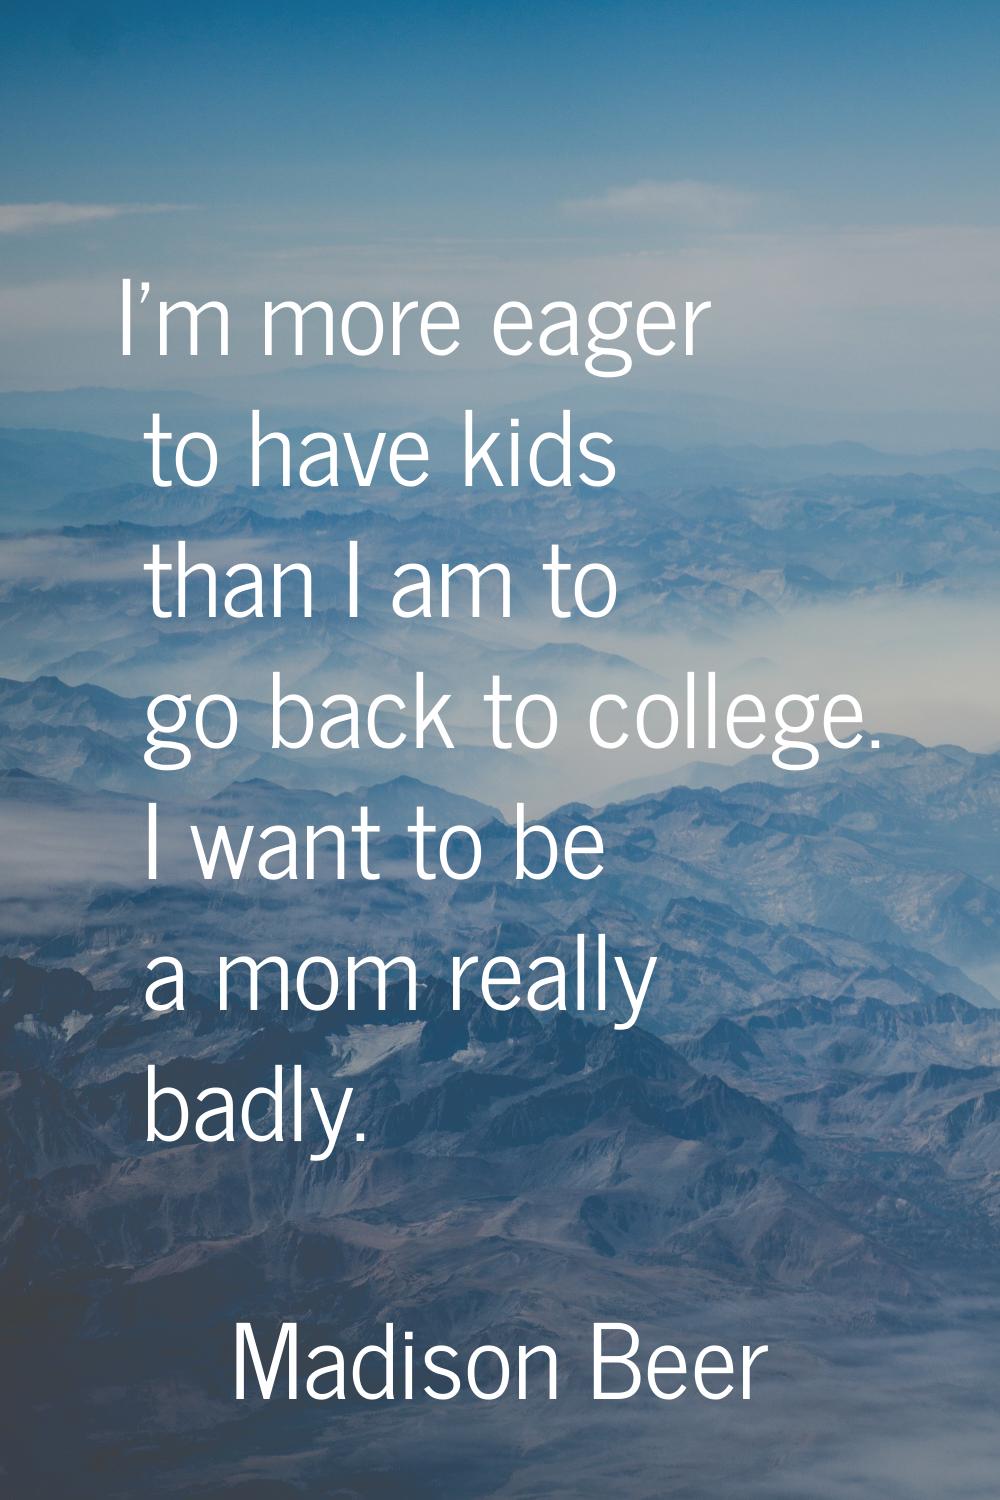 I'm more eager to have kids than I am to go back to college. I want to be a mom really badly.